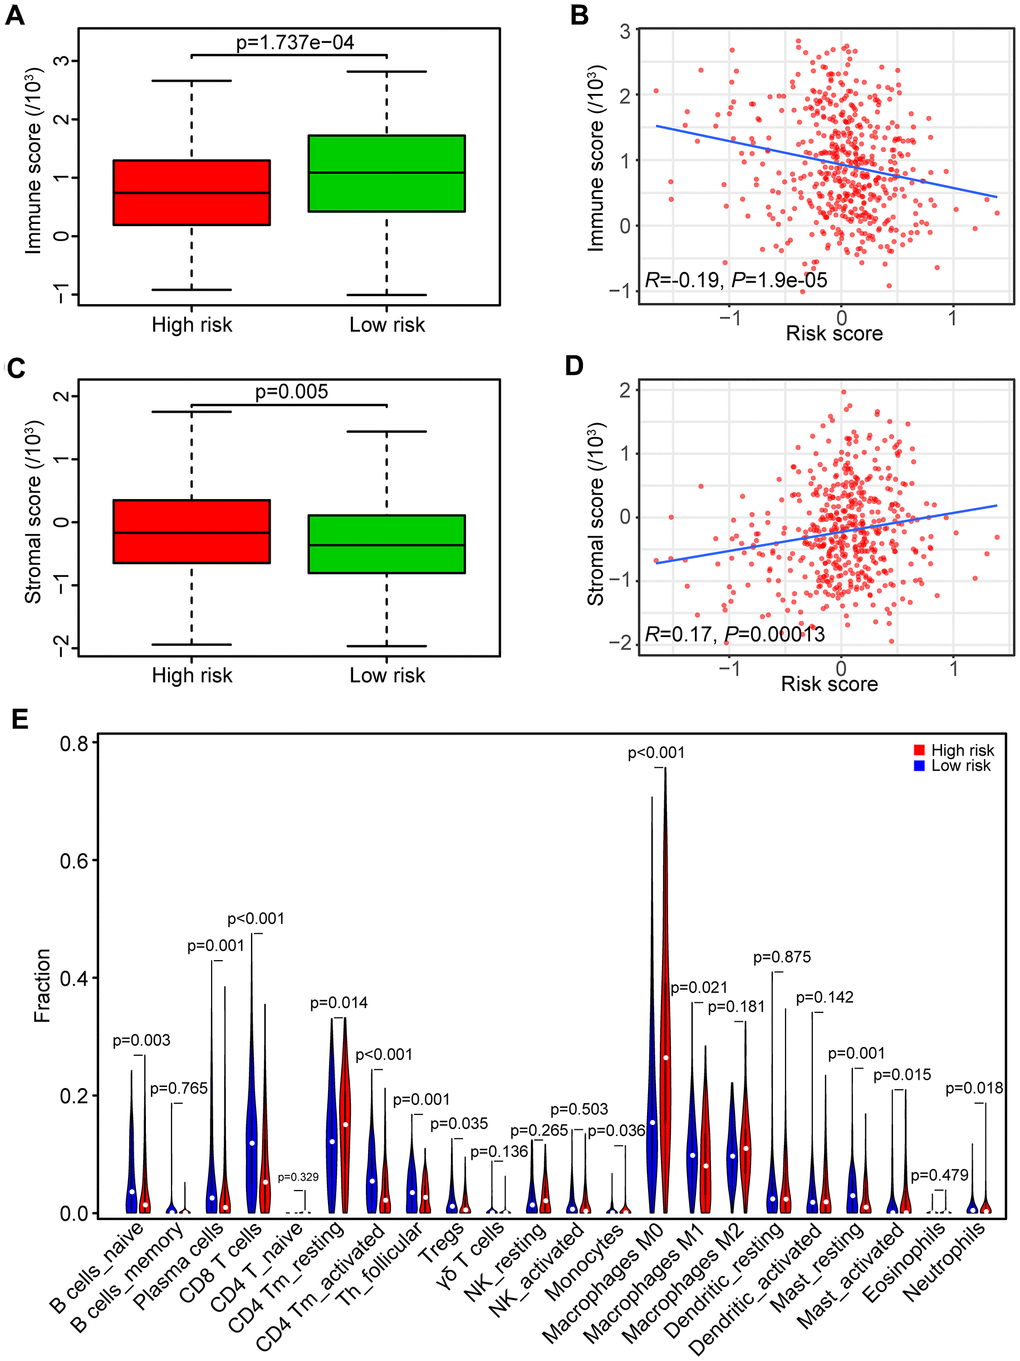 Association between risk score and tumor immunity. (A) Distribution of immune scores in high- and low-risk HNSCC patients. (B) Association between the risk score and immune score in HNSCC samples. (C) Distribution of stromal scores in high- and low-risk HNSCC patients. (D) Association between the risk score and stromal score in HNSCC samples. (E) Comparison of immune cell fractions between the high-risk and low-risk HNSCC patients.